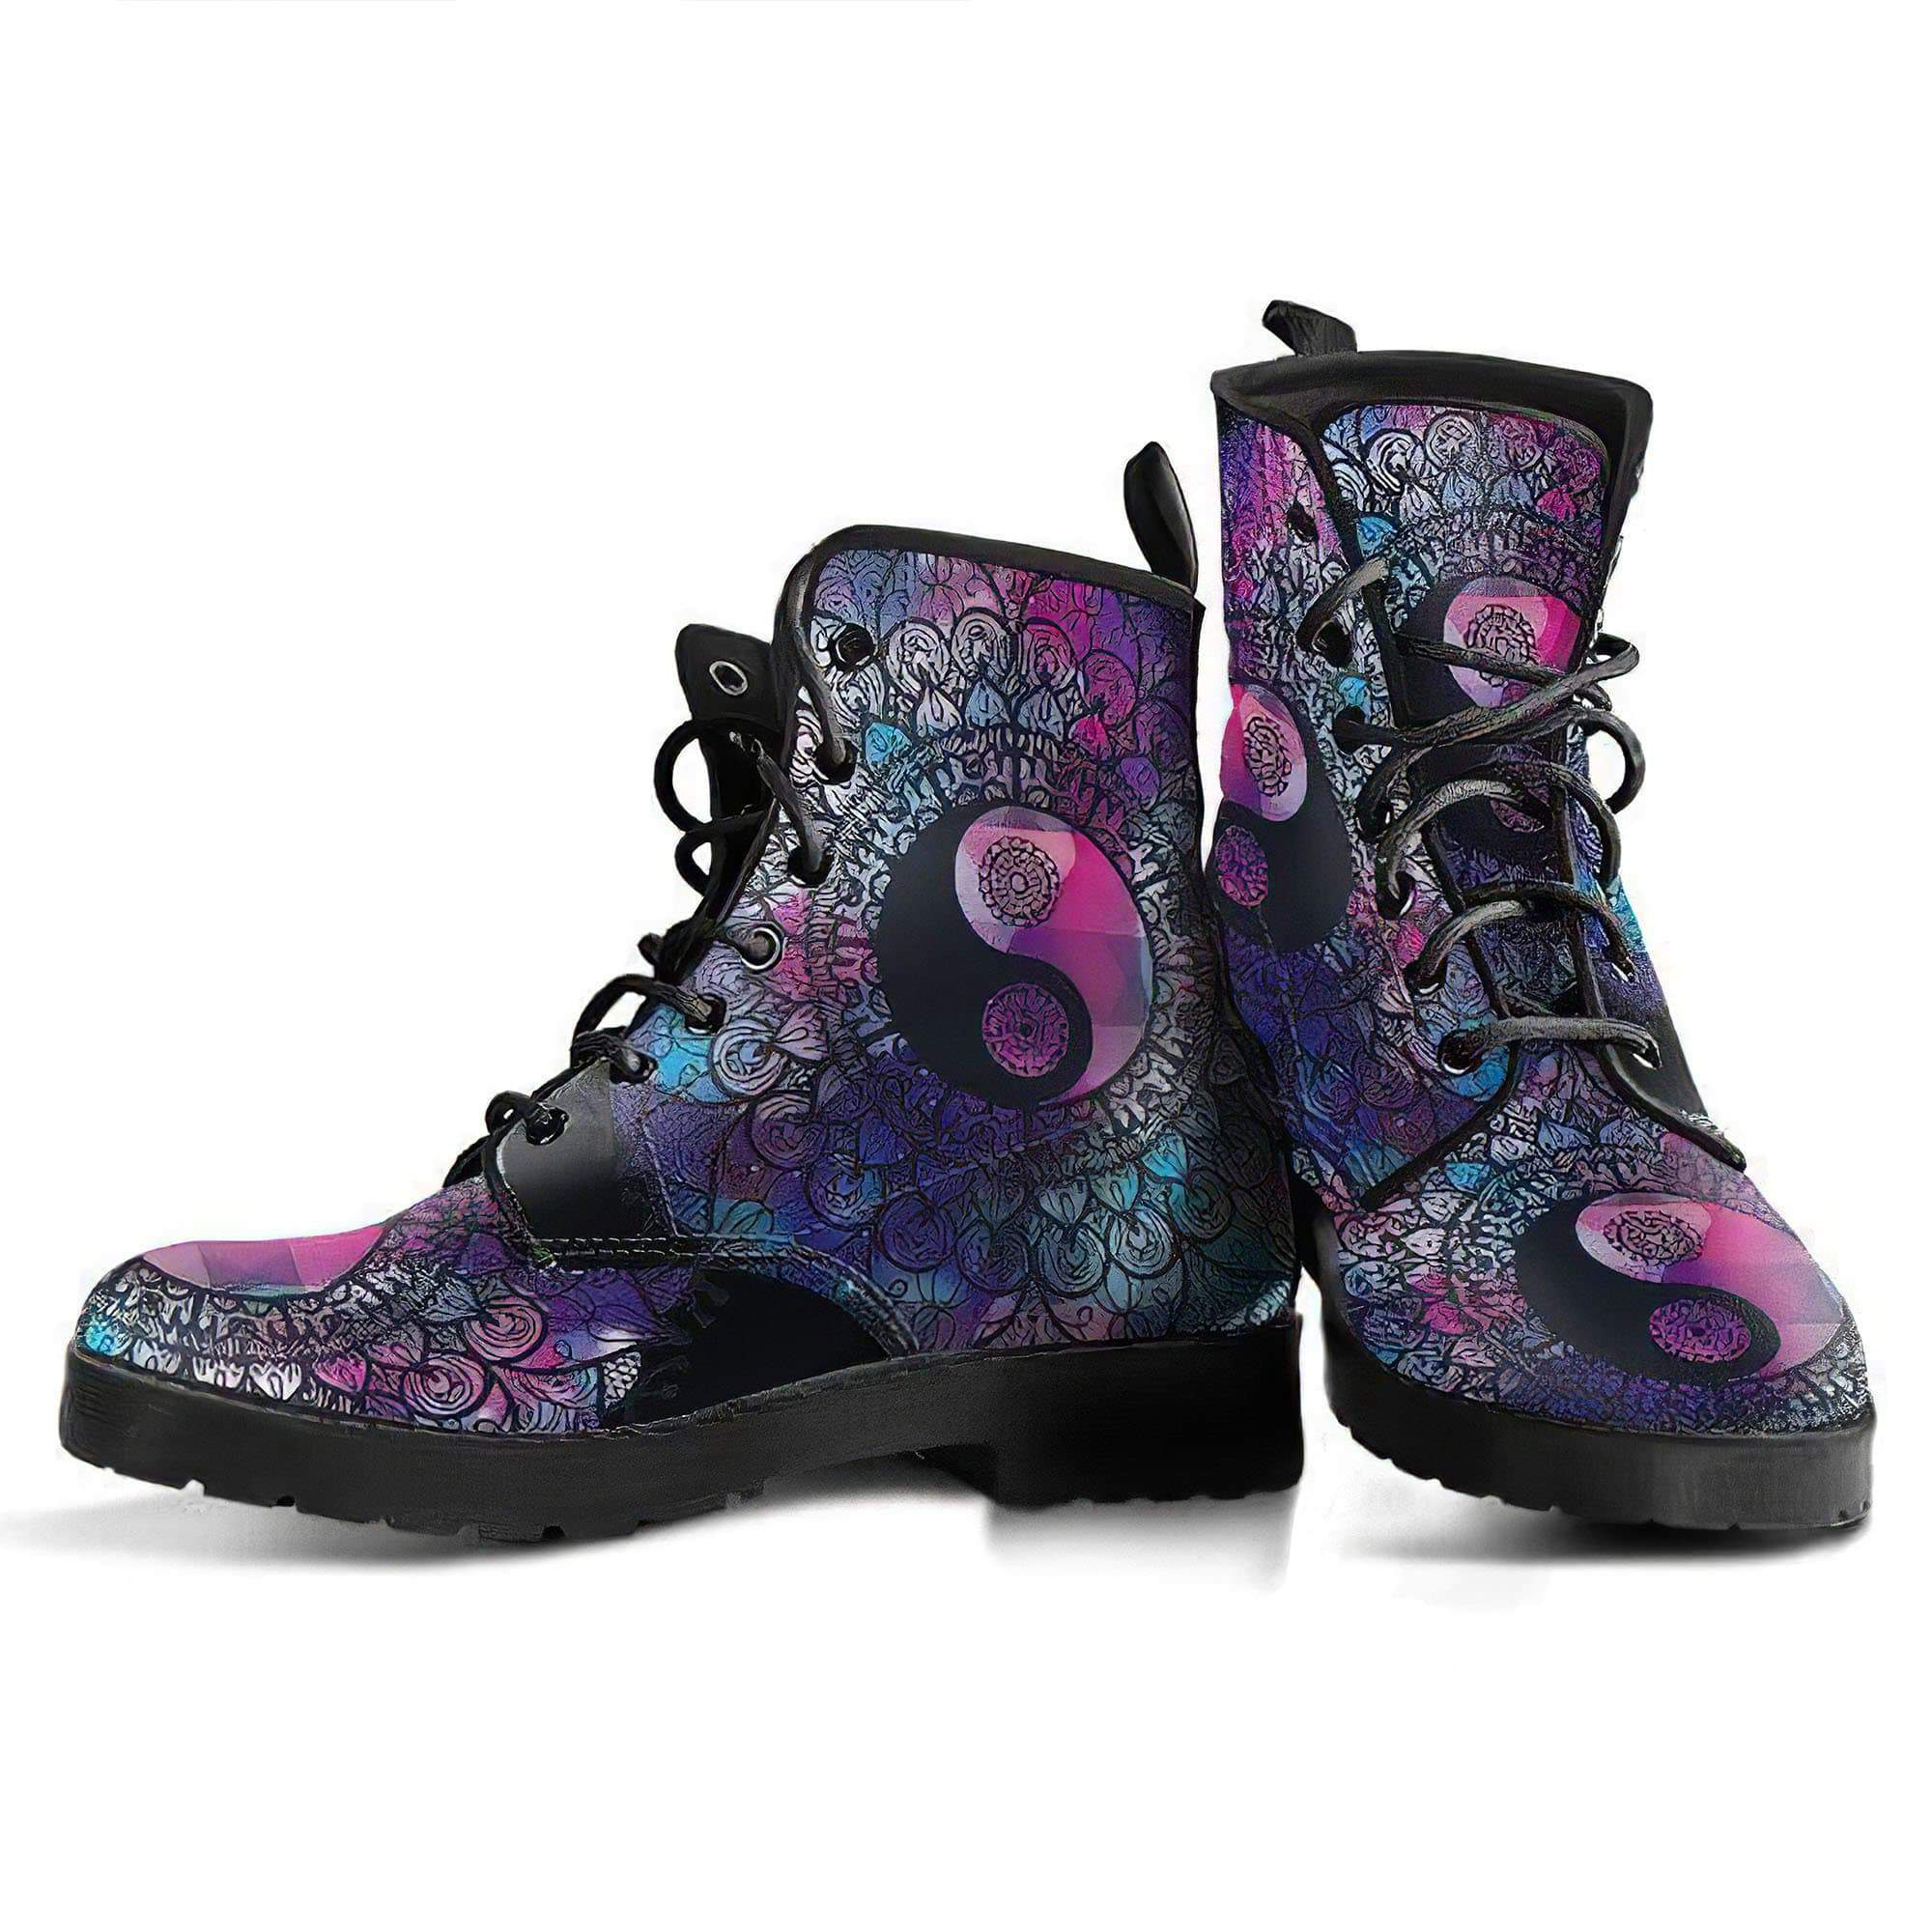 yinyang-mandala-4-handcrafted-boots-women-s-leather-boots-12051983433789.jpg